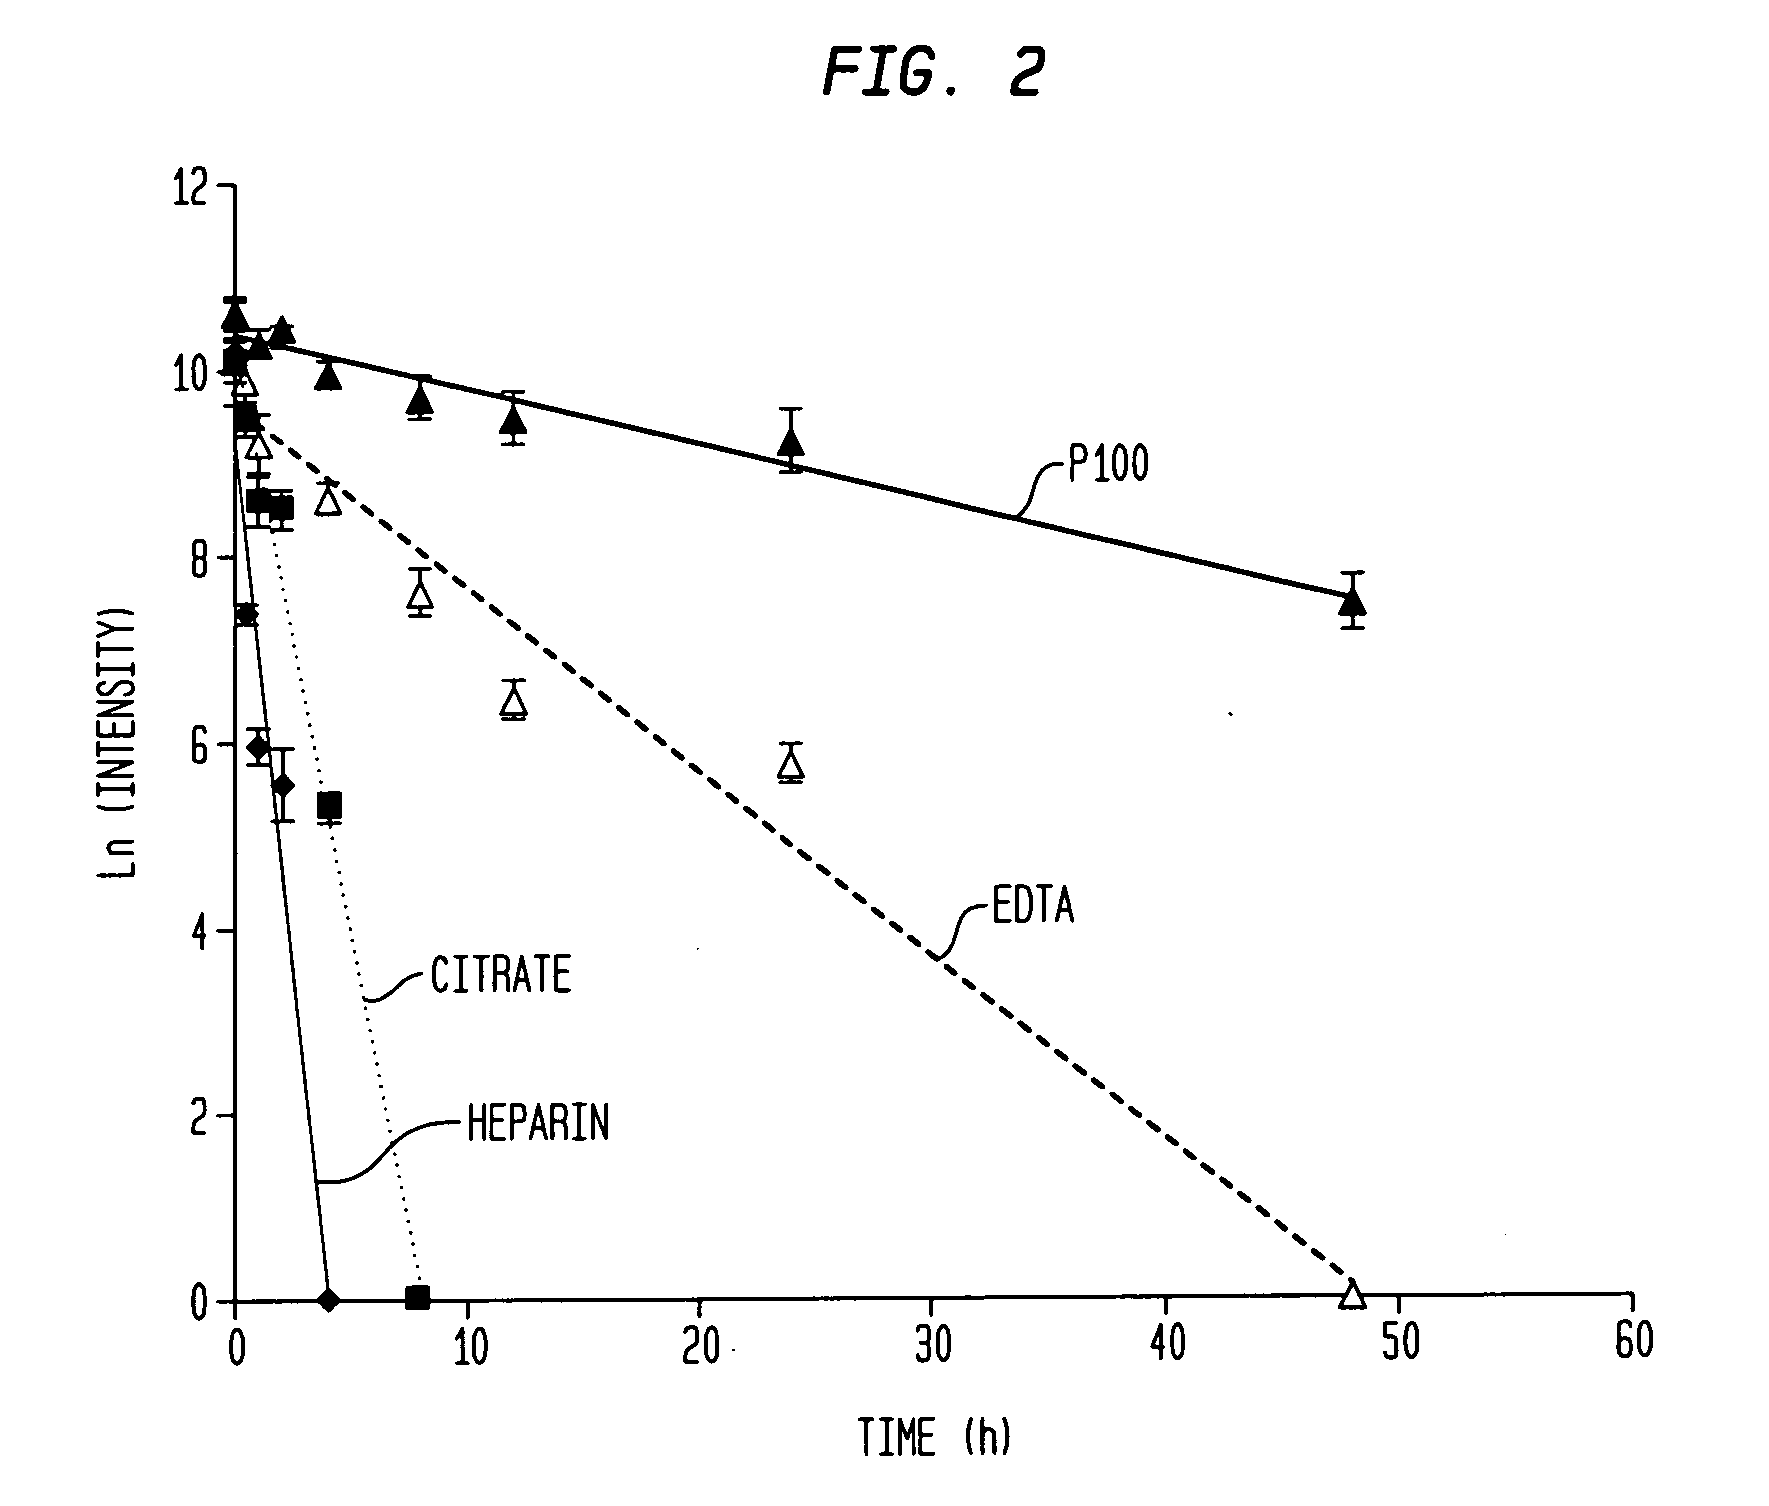 System and method for diagnosing diseases